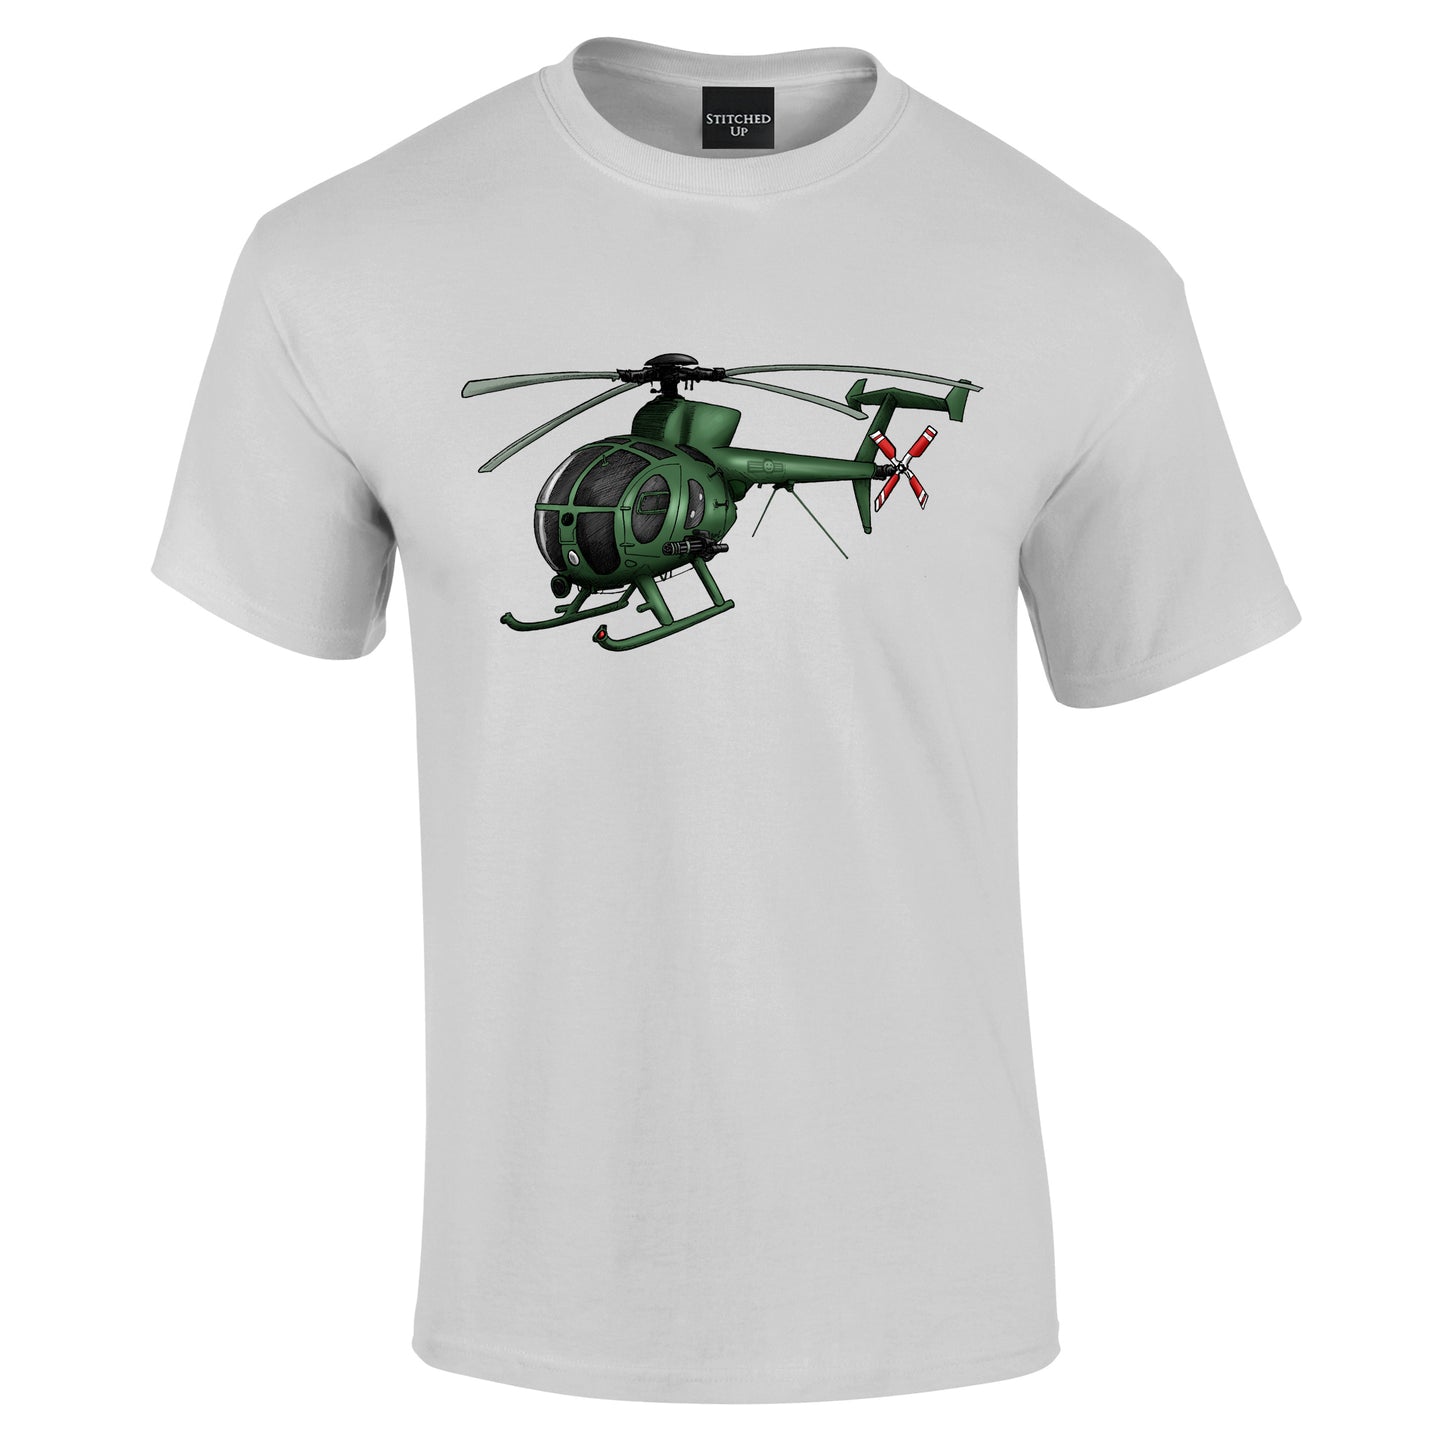 Hughes Helicopter T-Shirt hand drawn